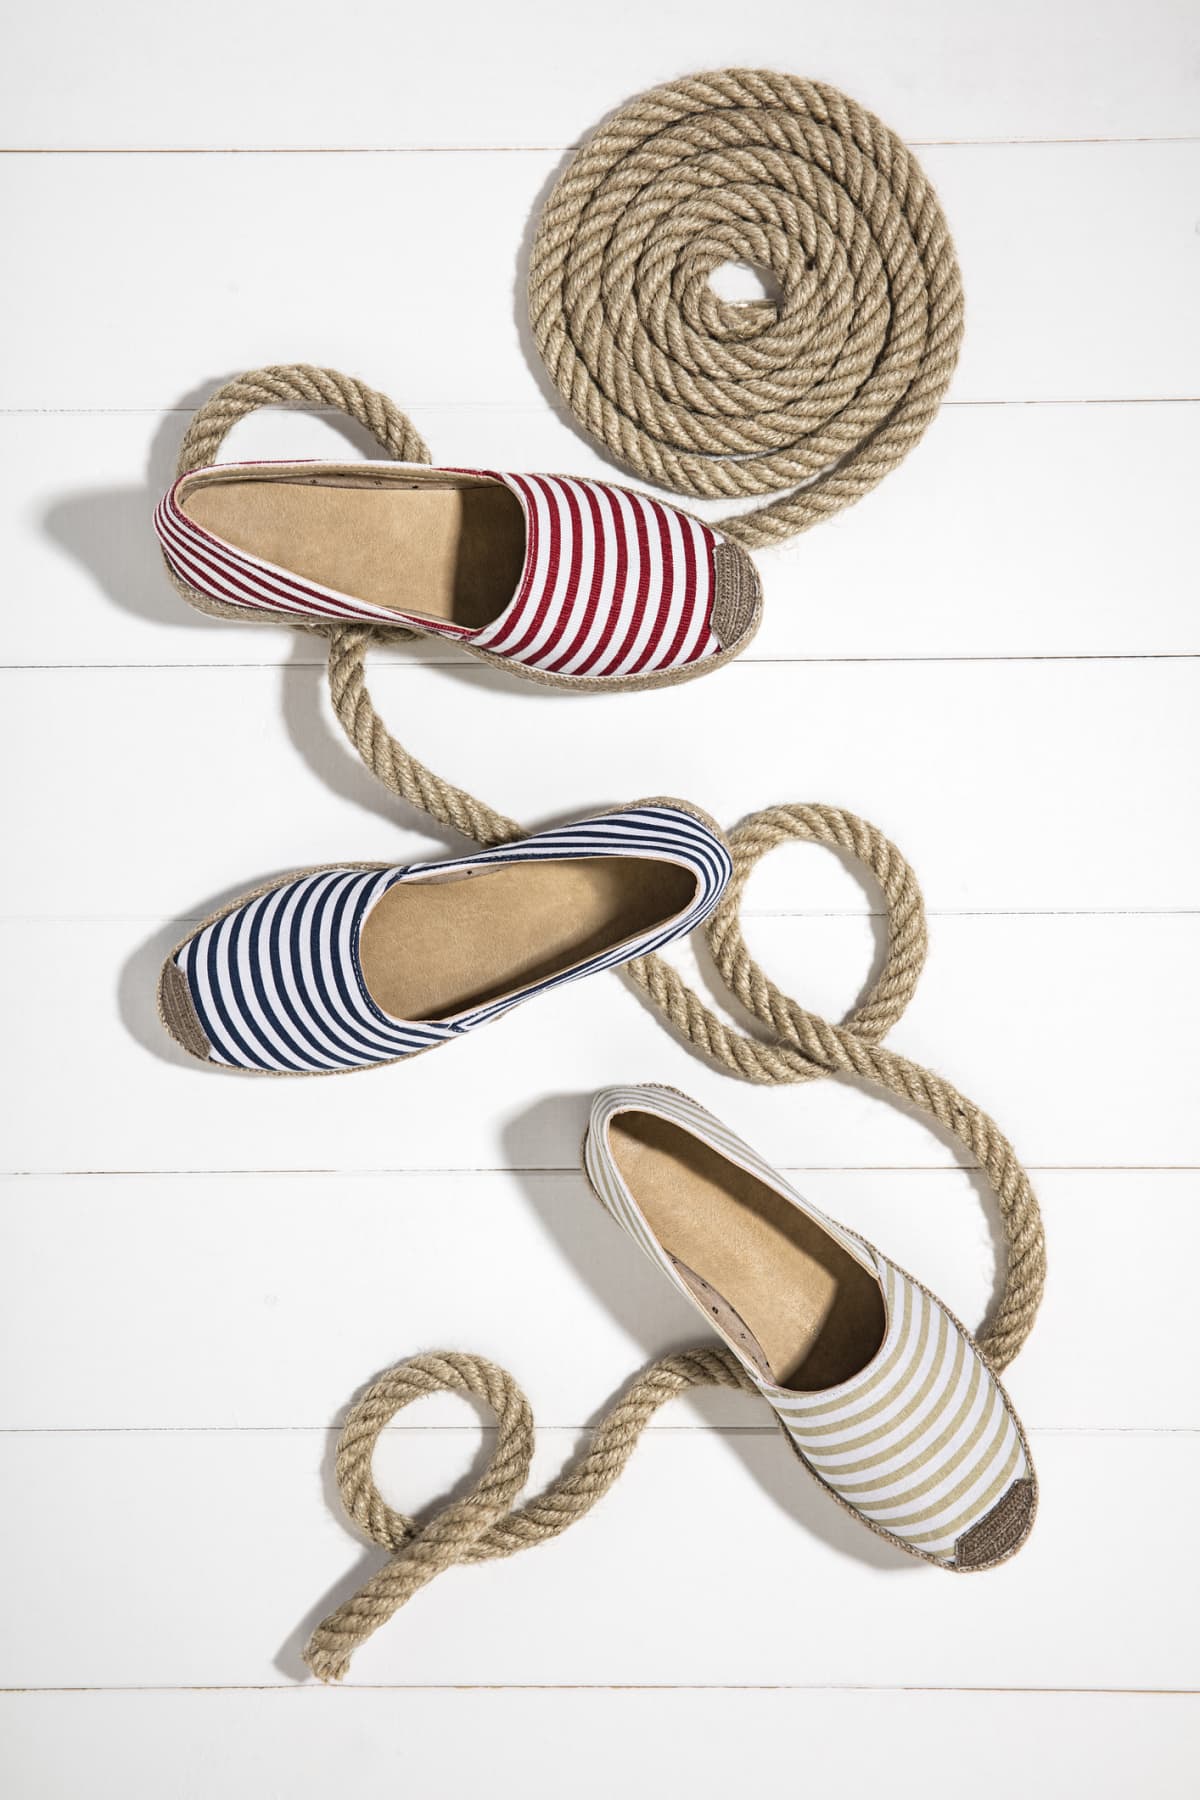 Striped espadrille shoes on a white background